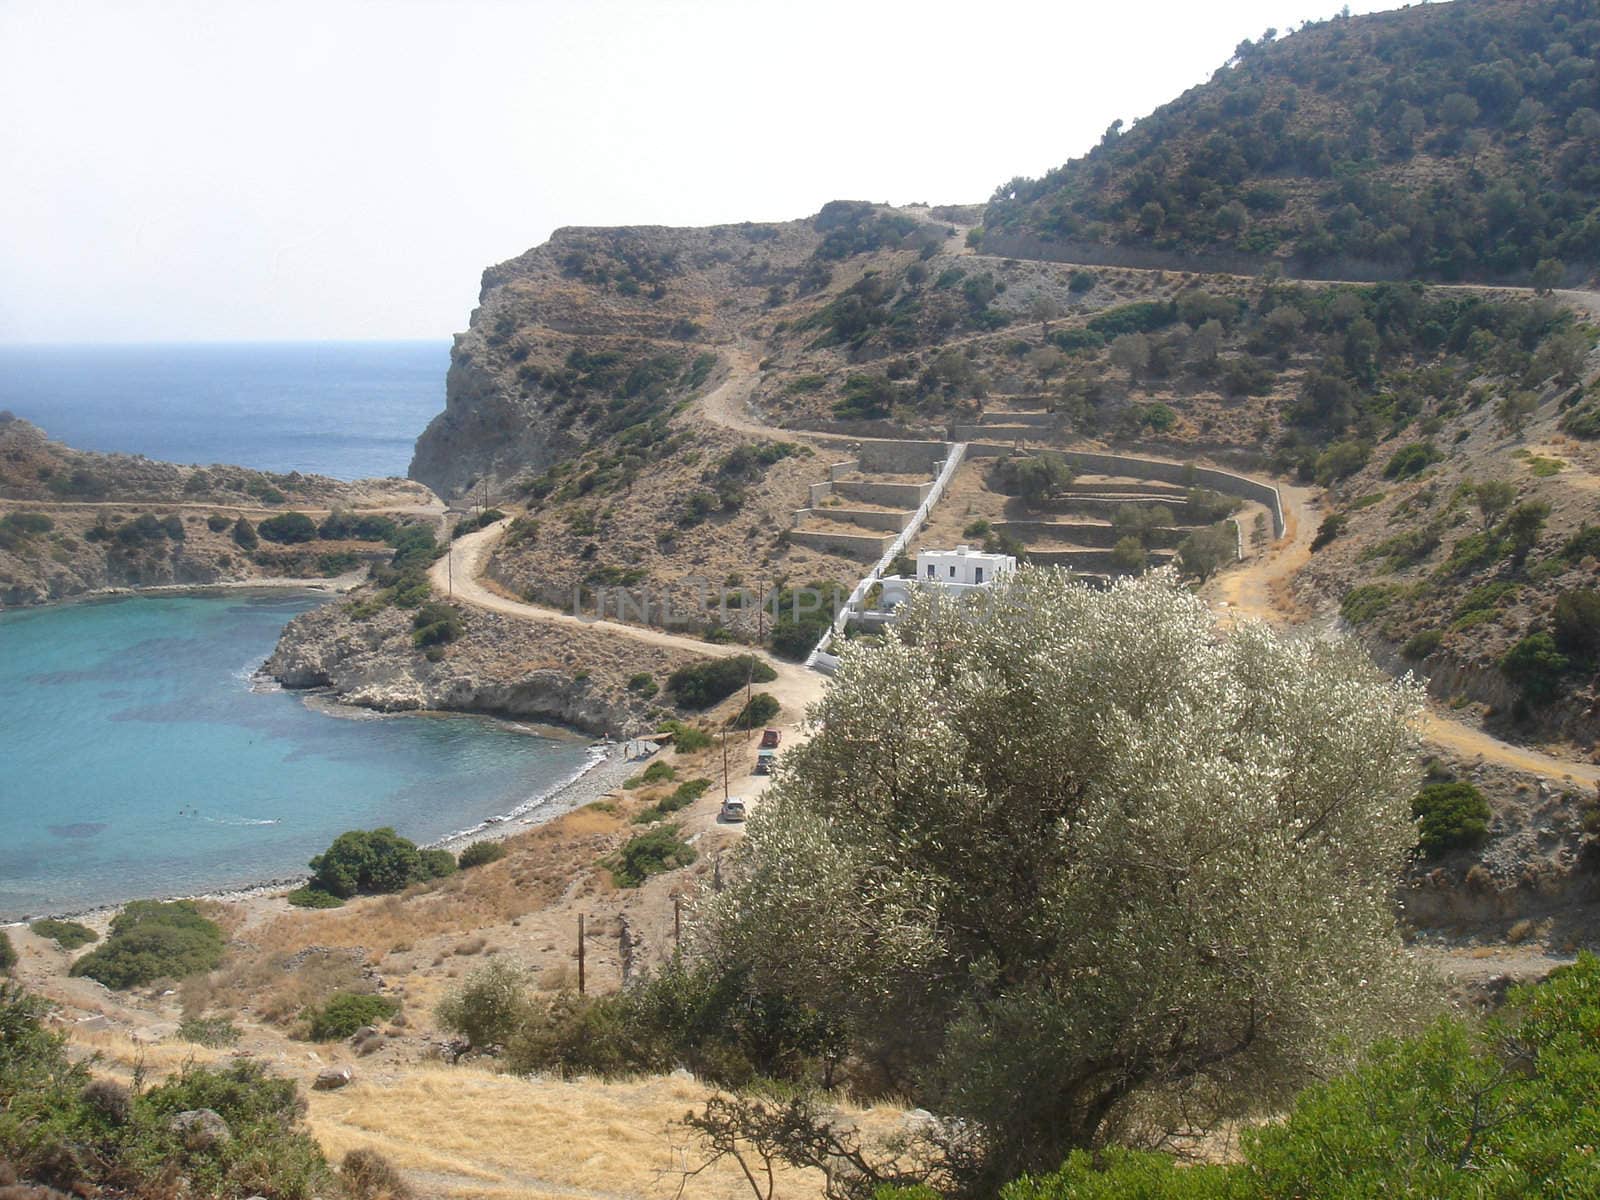 View of terraces and ground roads near the sea                               